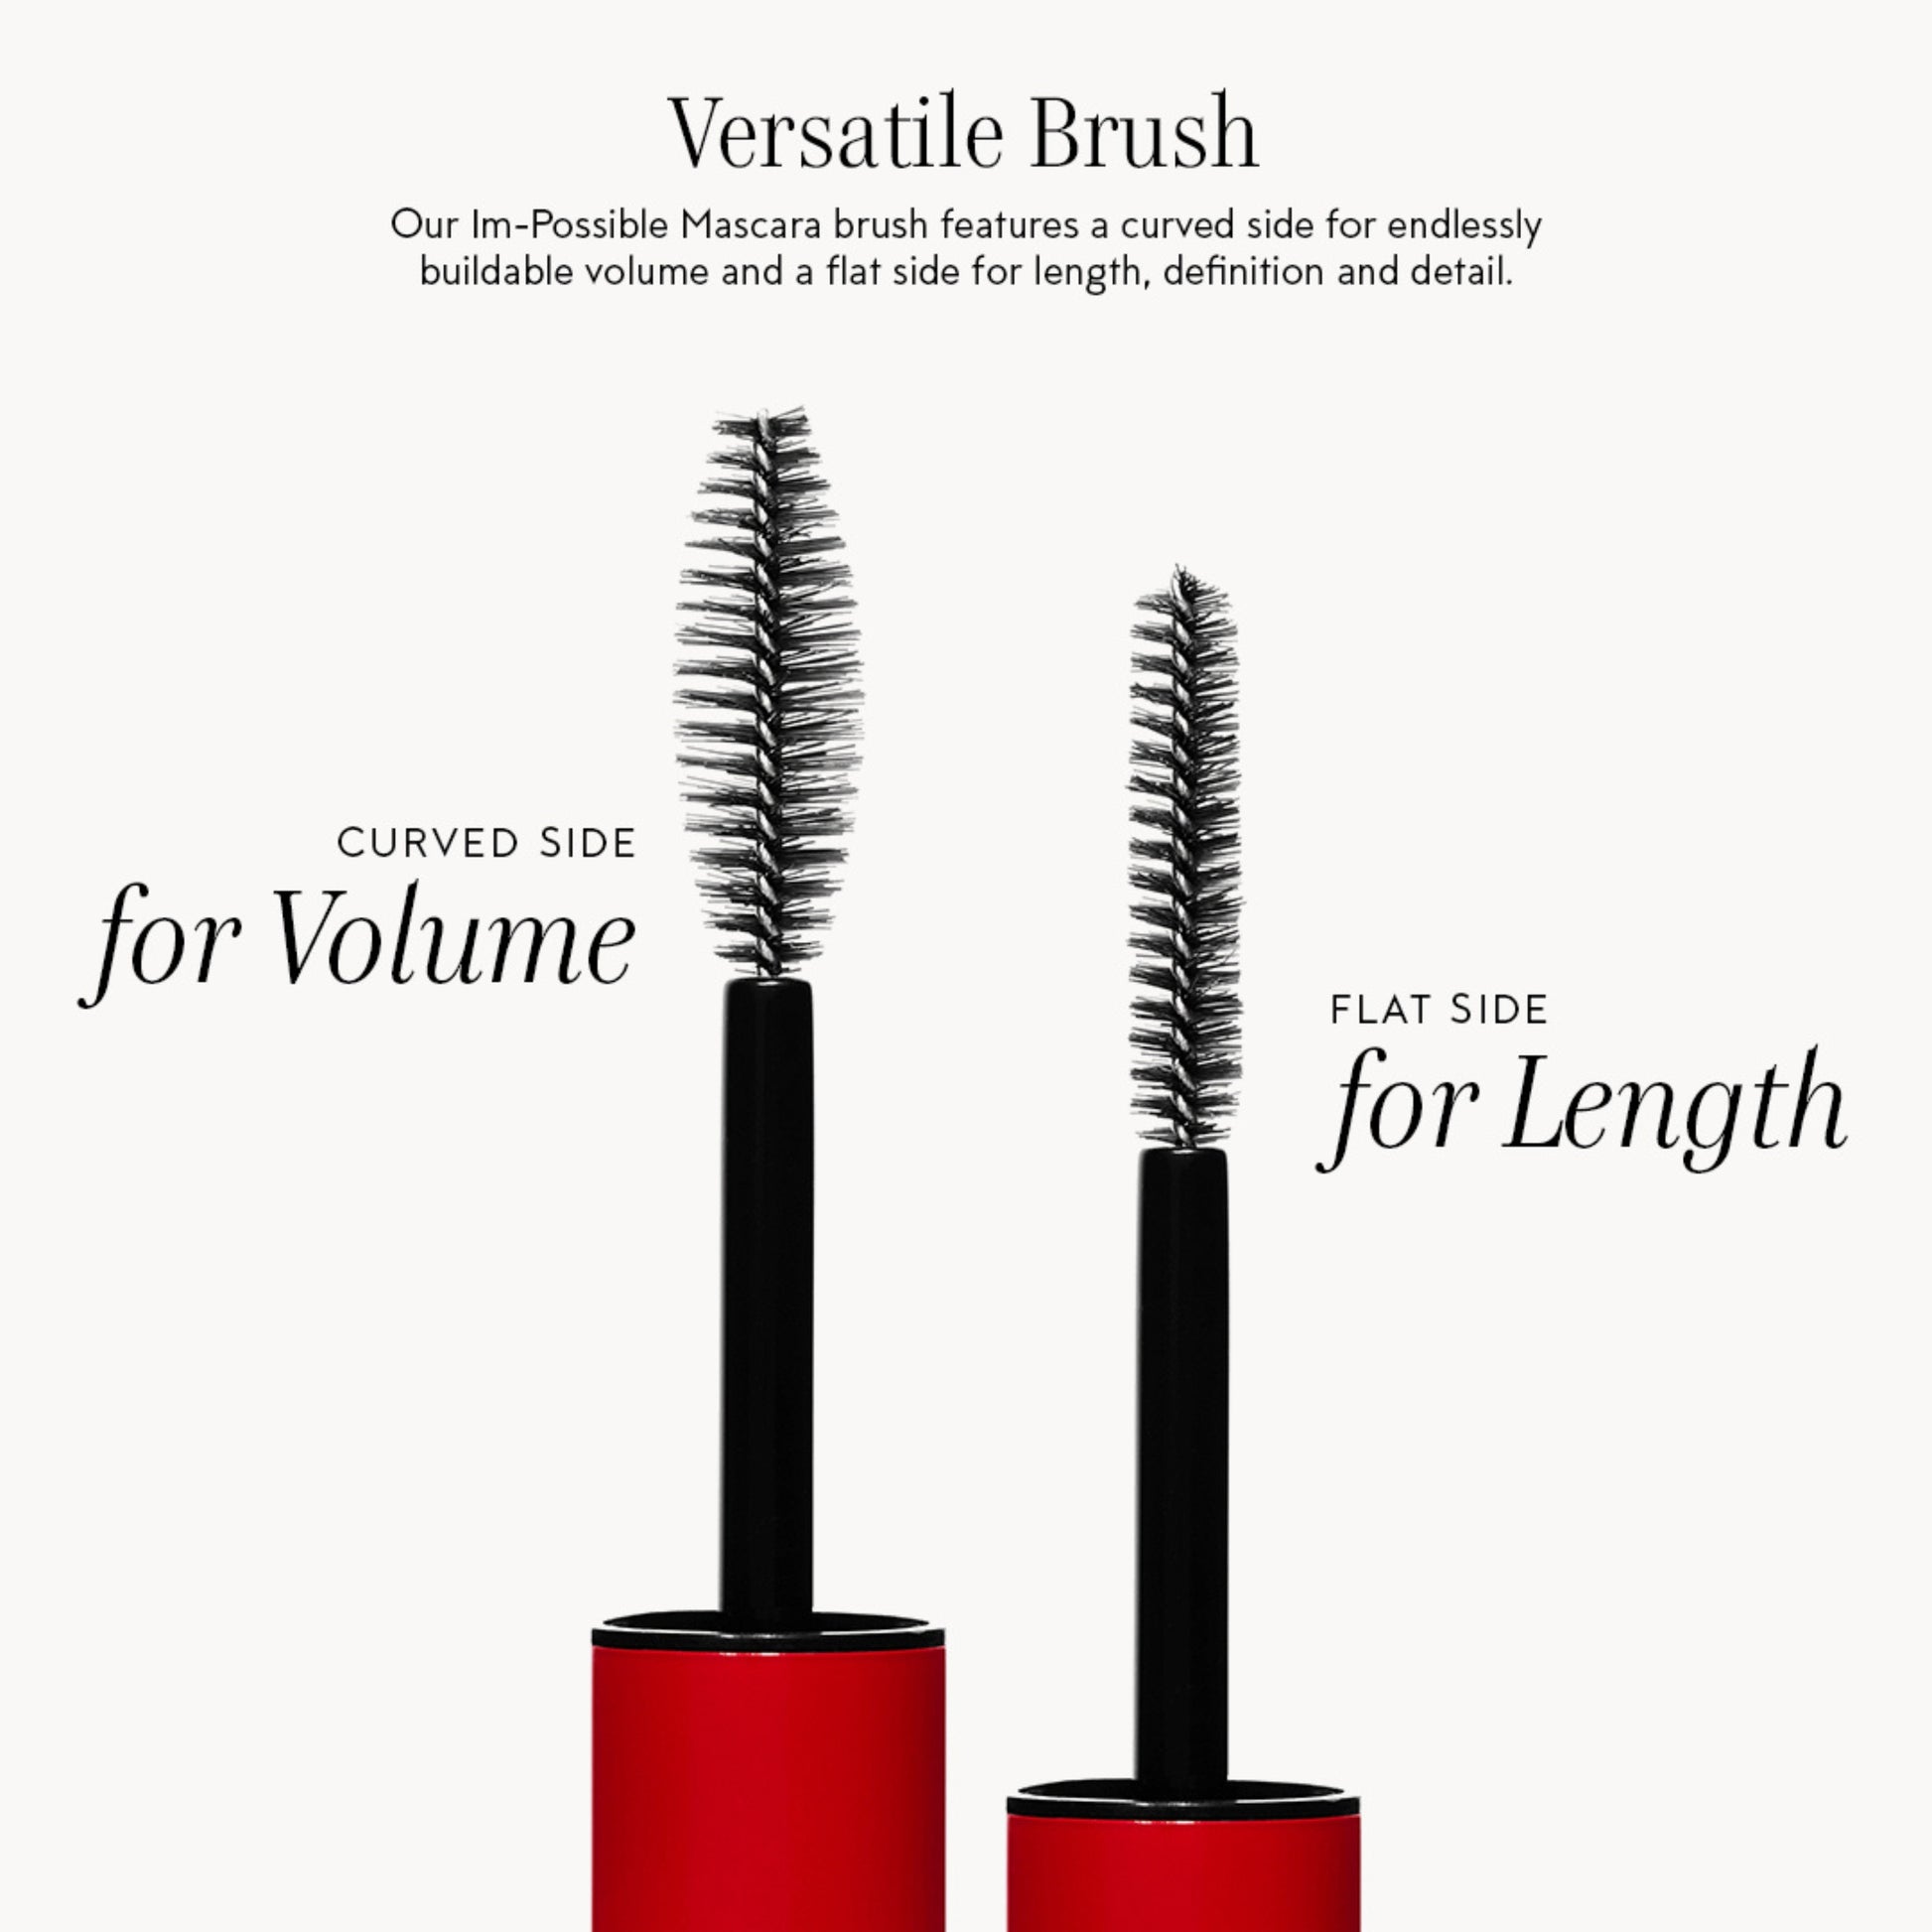 Graphic showing how one side of the mascara wand is curved for buildable volume and the other side is flat for definition and length